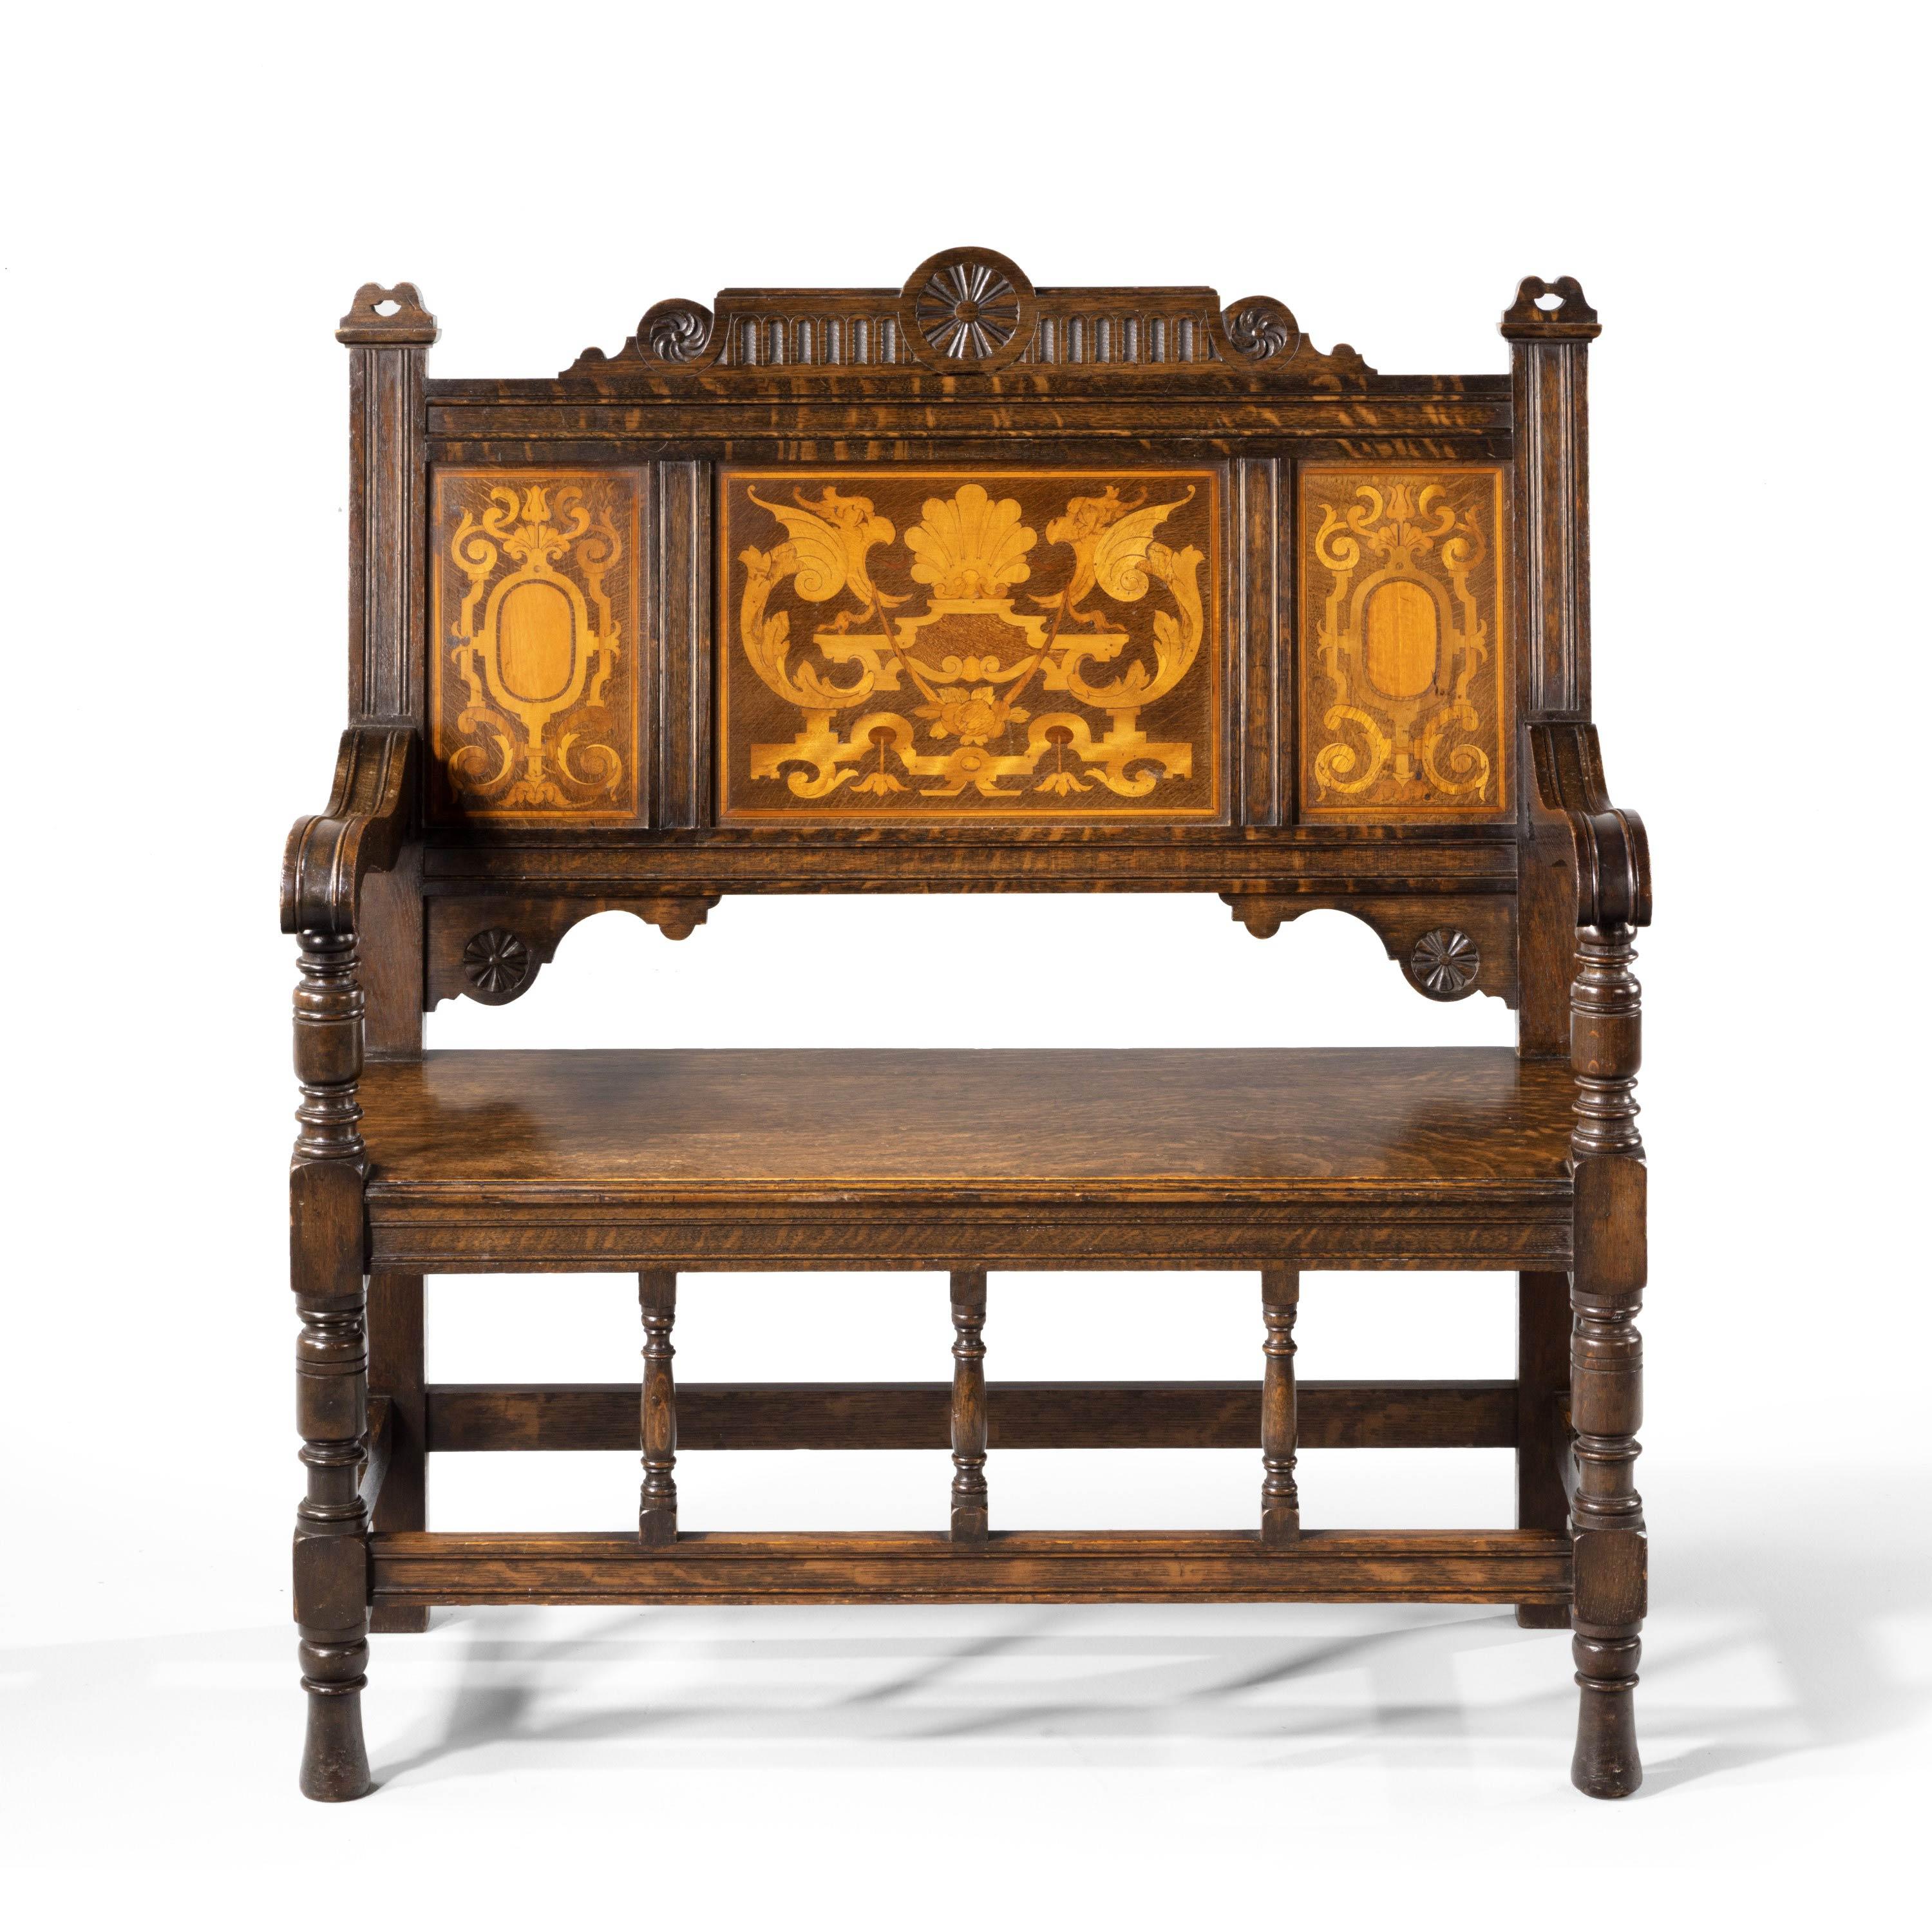 A most unusual and very good quality oak hall bench. With finely carved framework over moulded stretchers. The back beautifully inlaid with marquetry panels and the top with a carved pediment. Excellent overall condition and of most unusual